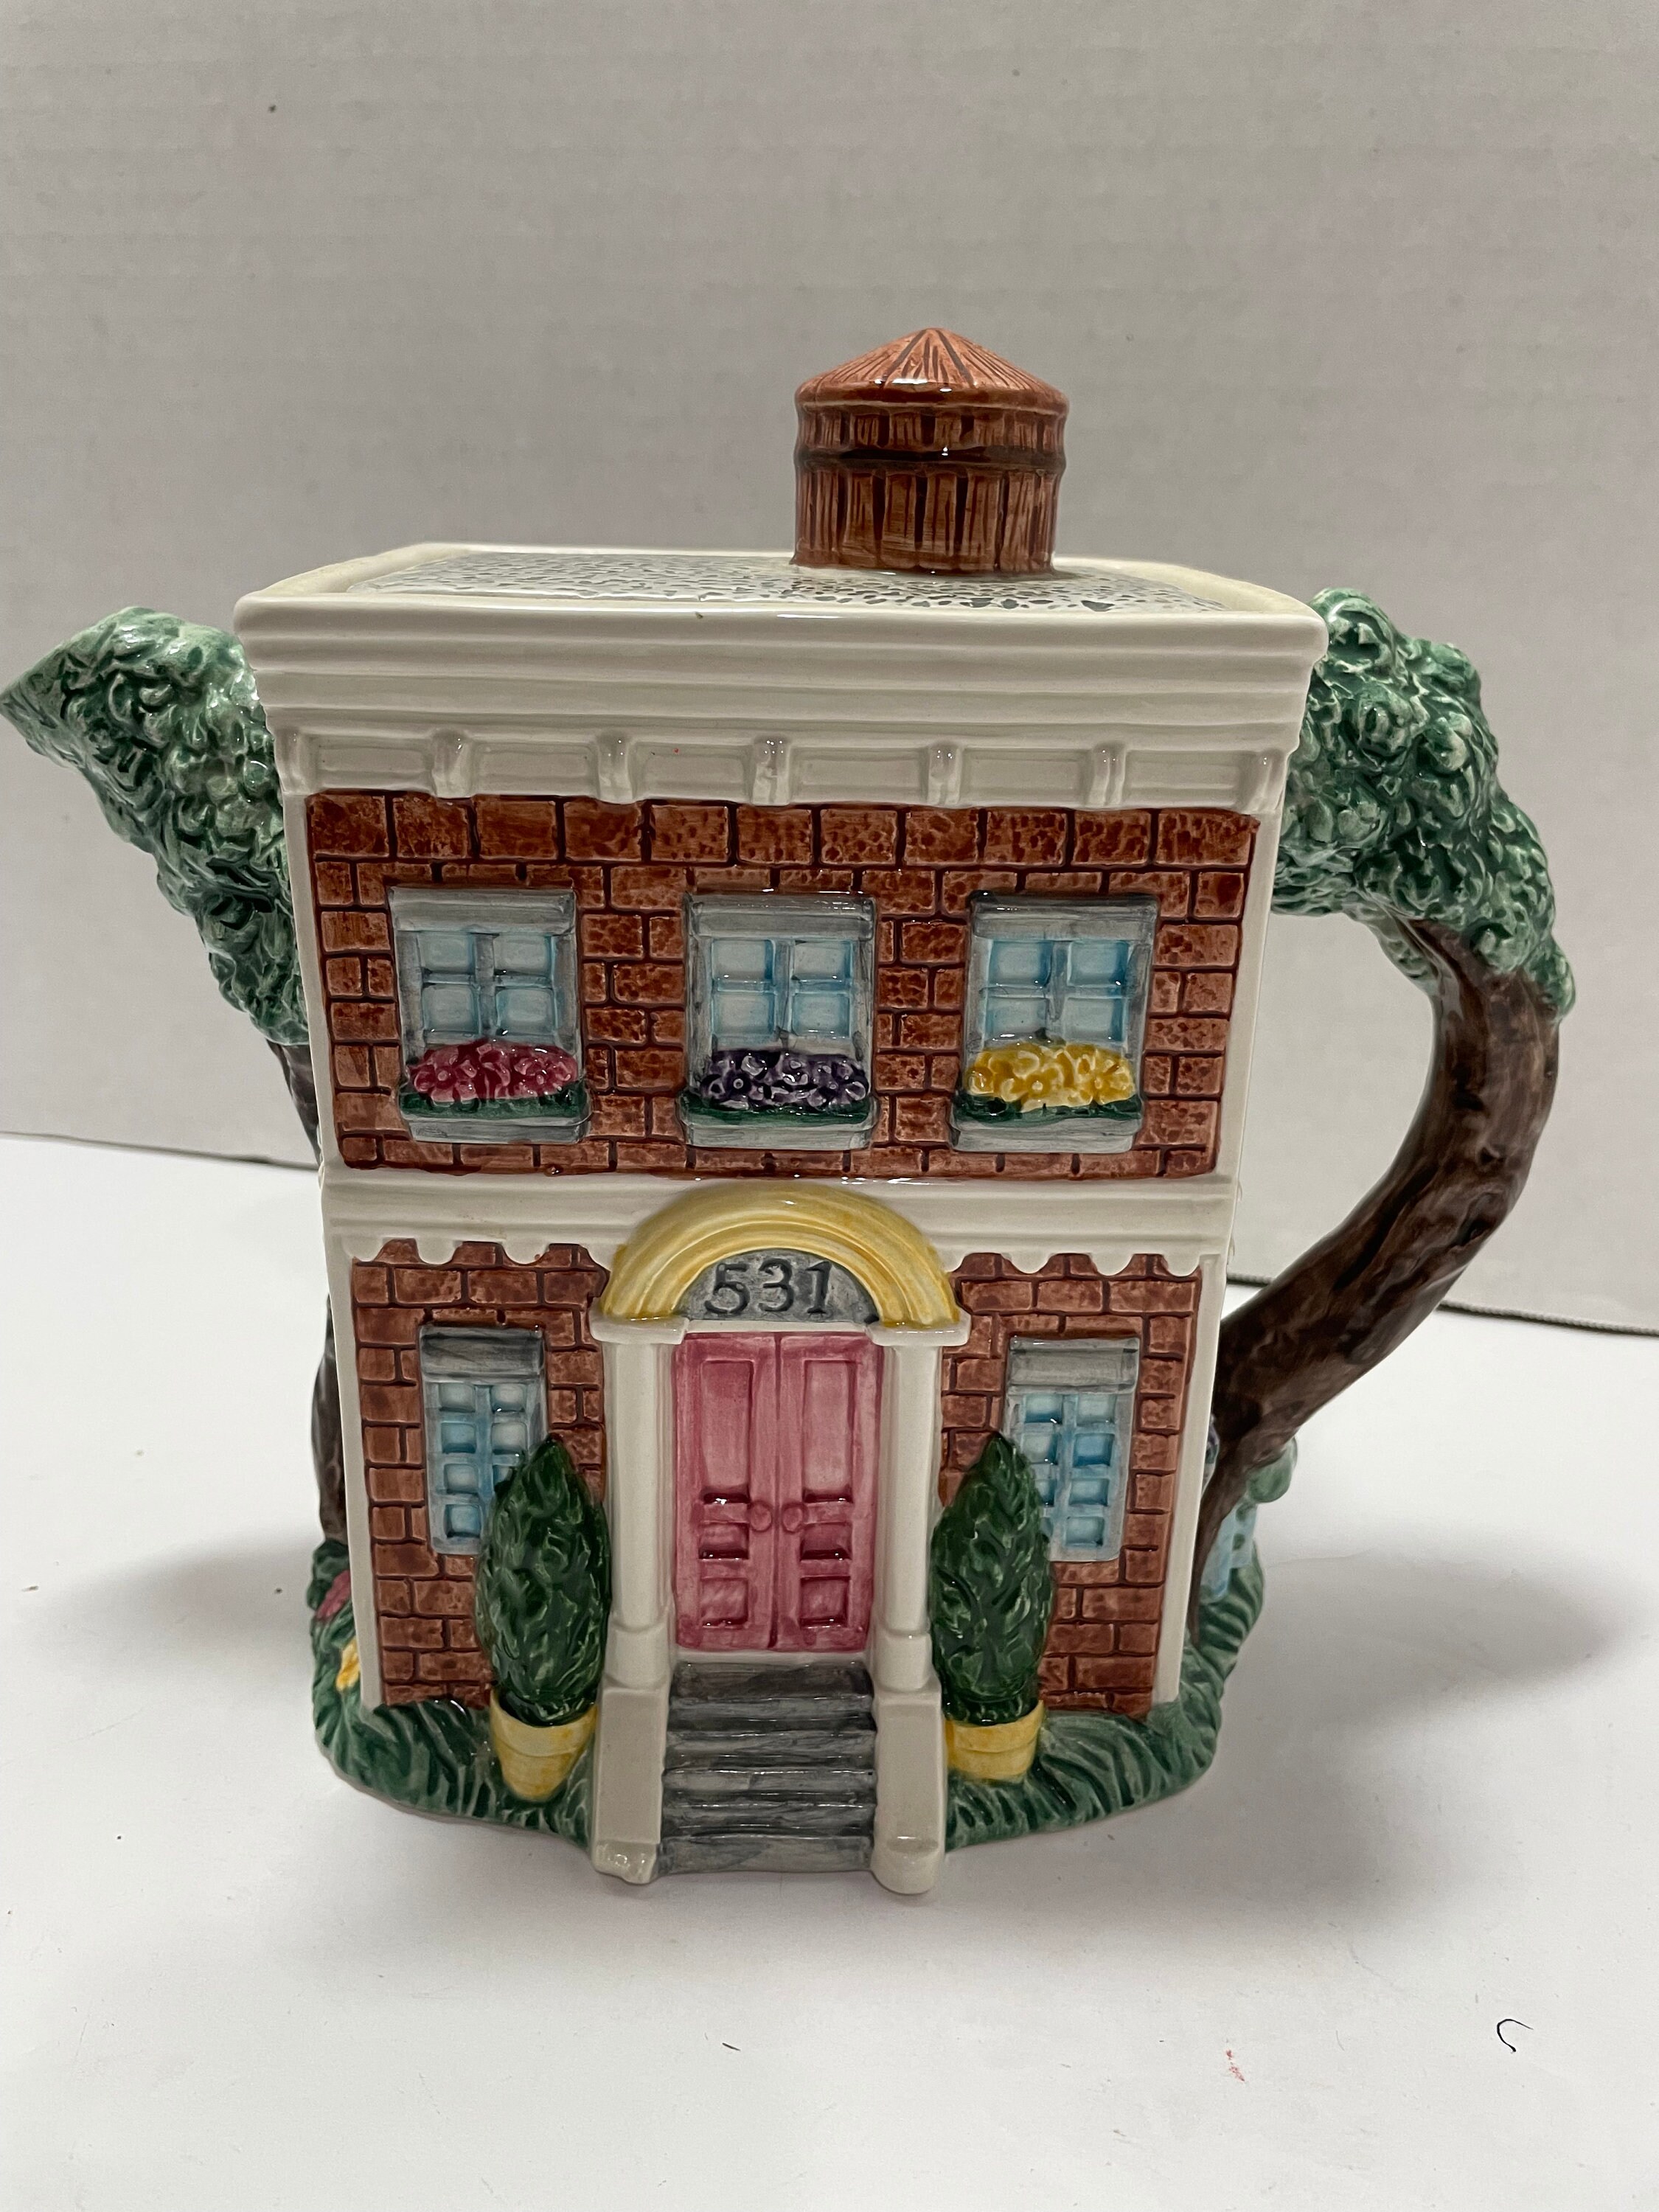 Fitz and Floyd Omnibus 531 house teapot 1995 46 0Z hand painted